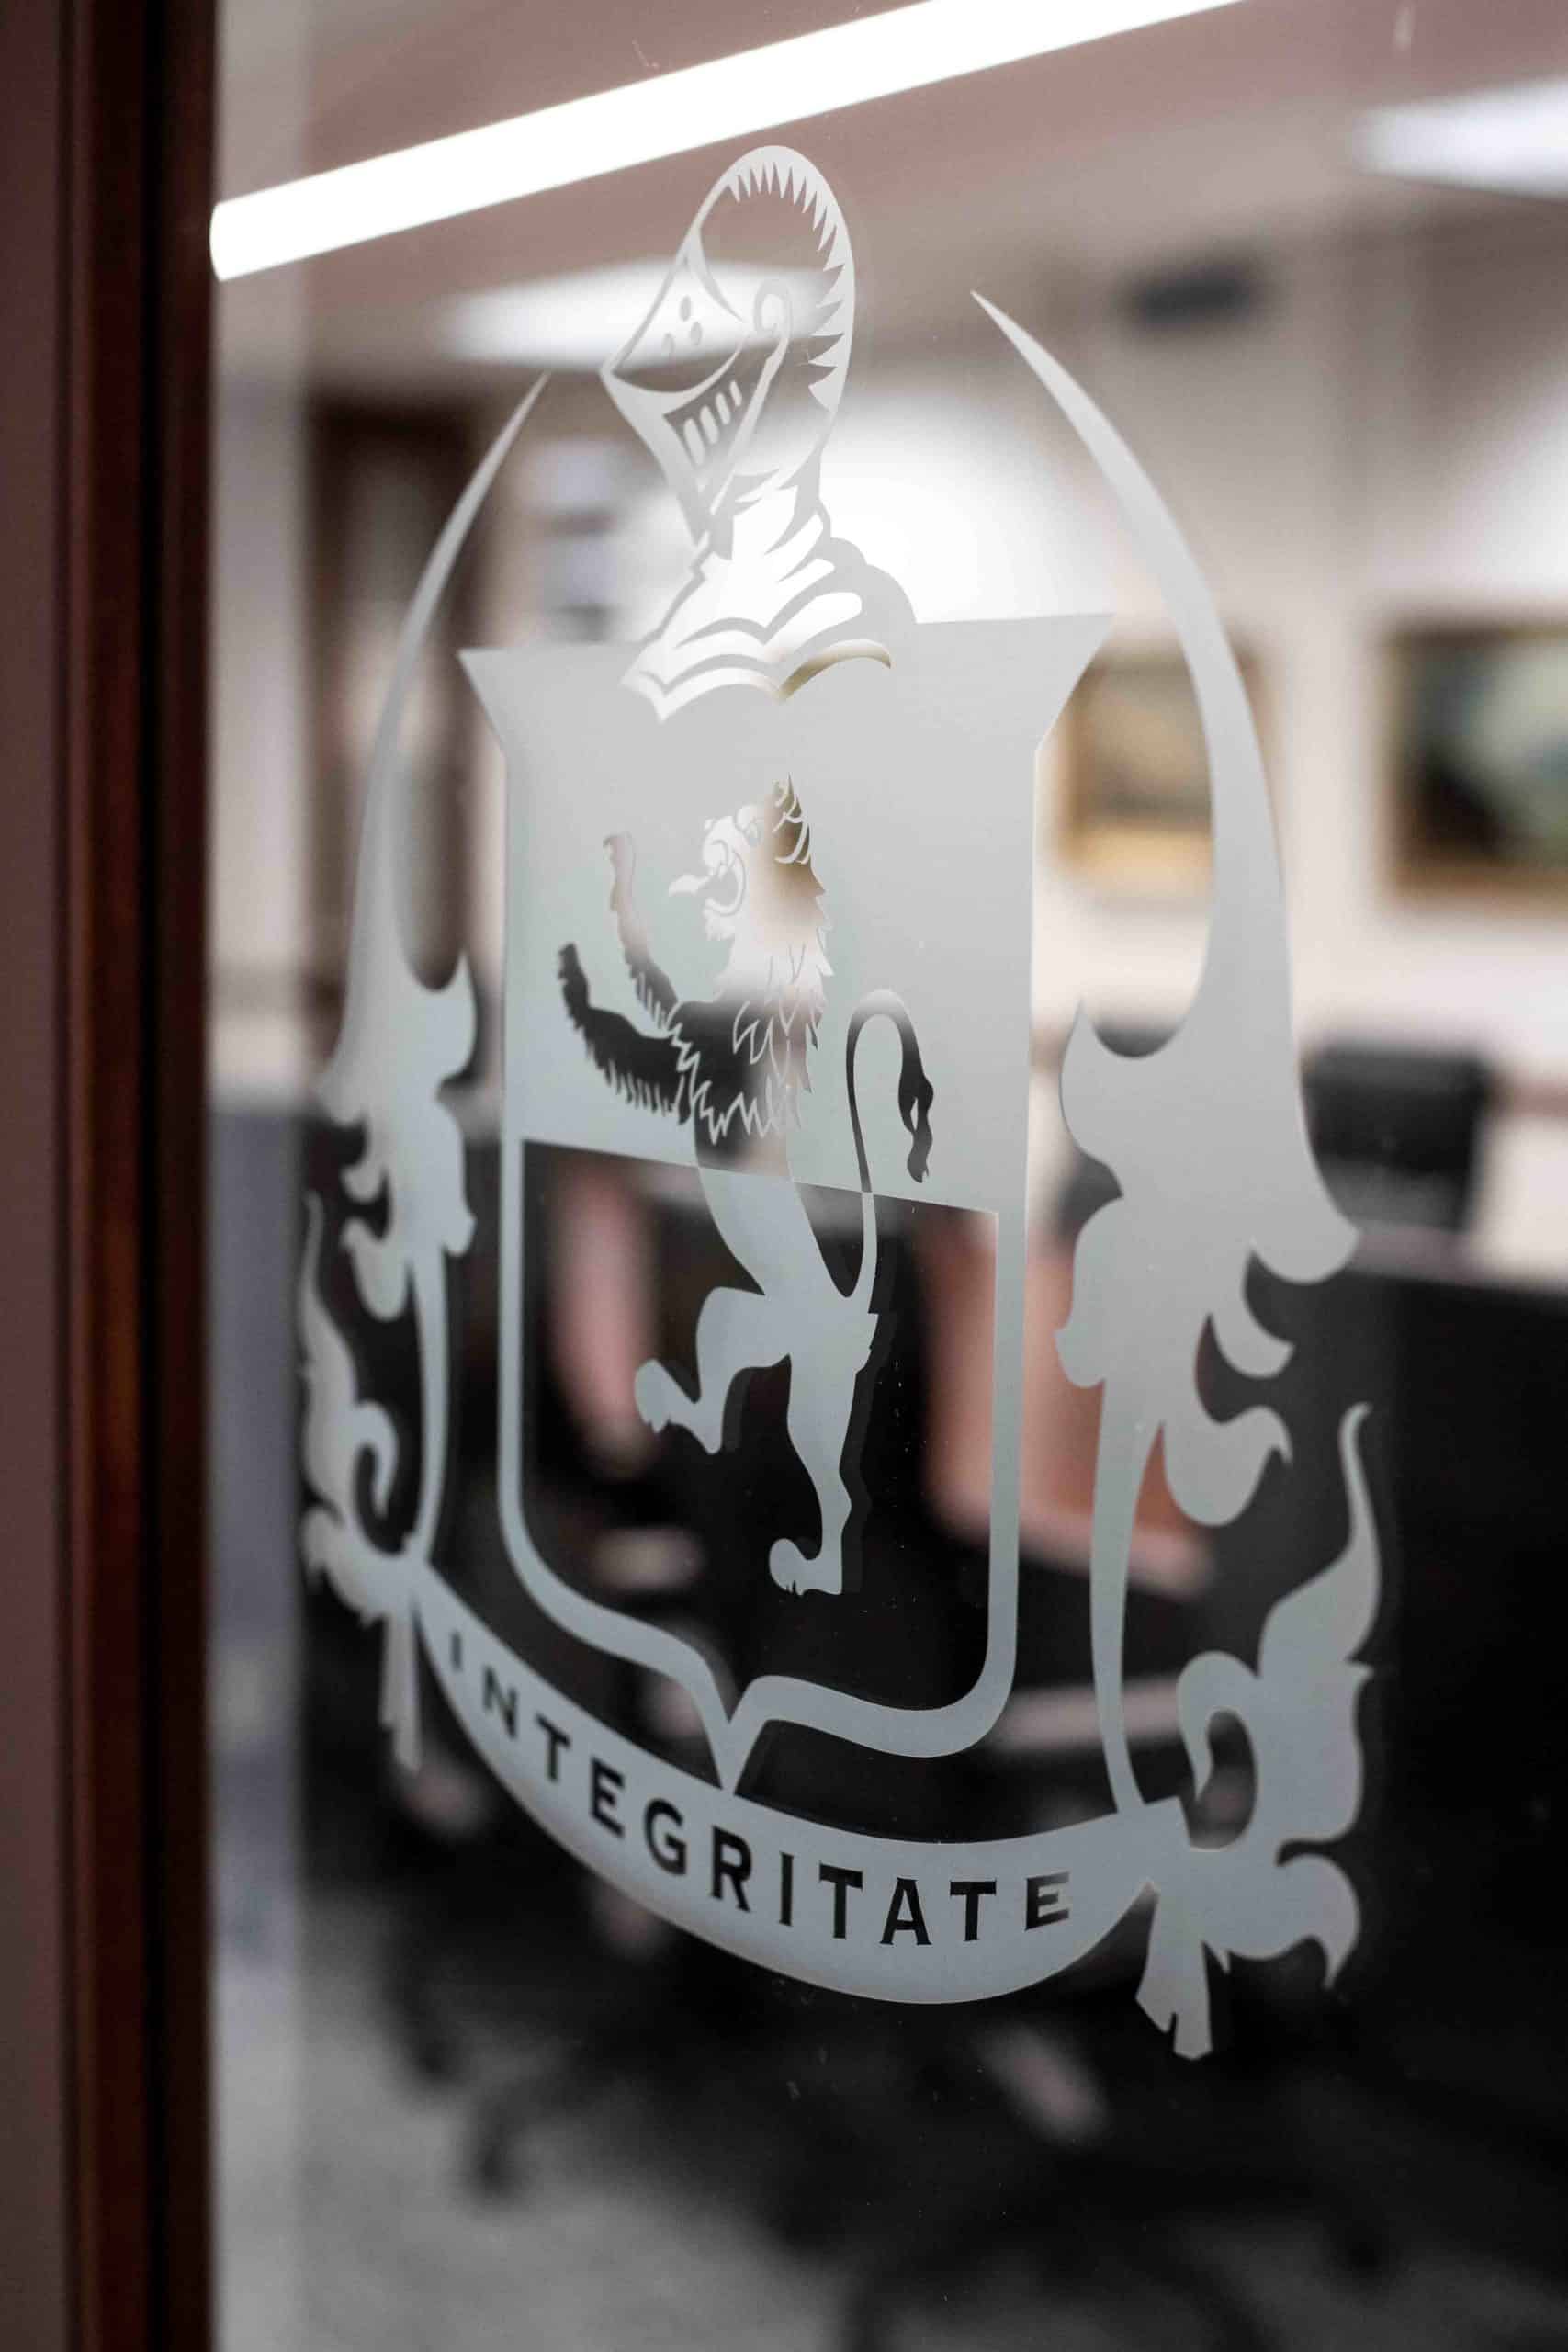 Frosted glass with logo on office door window